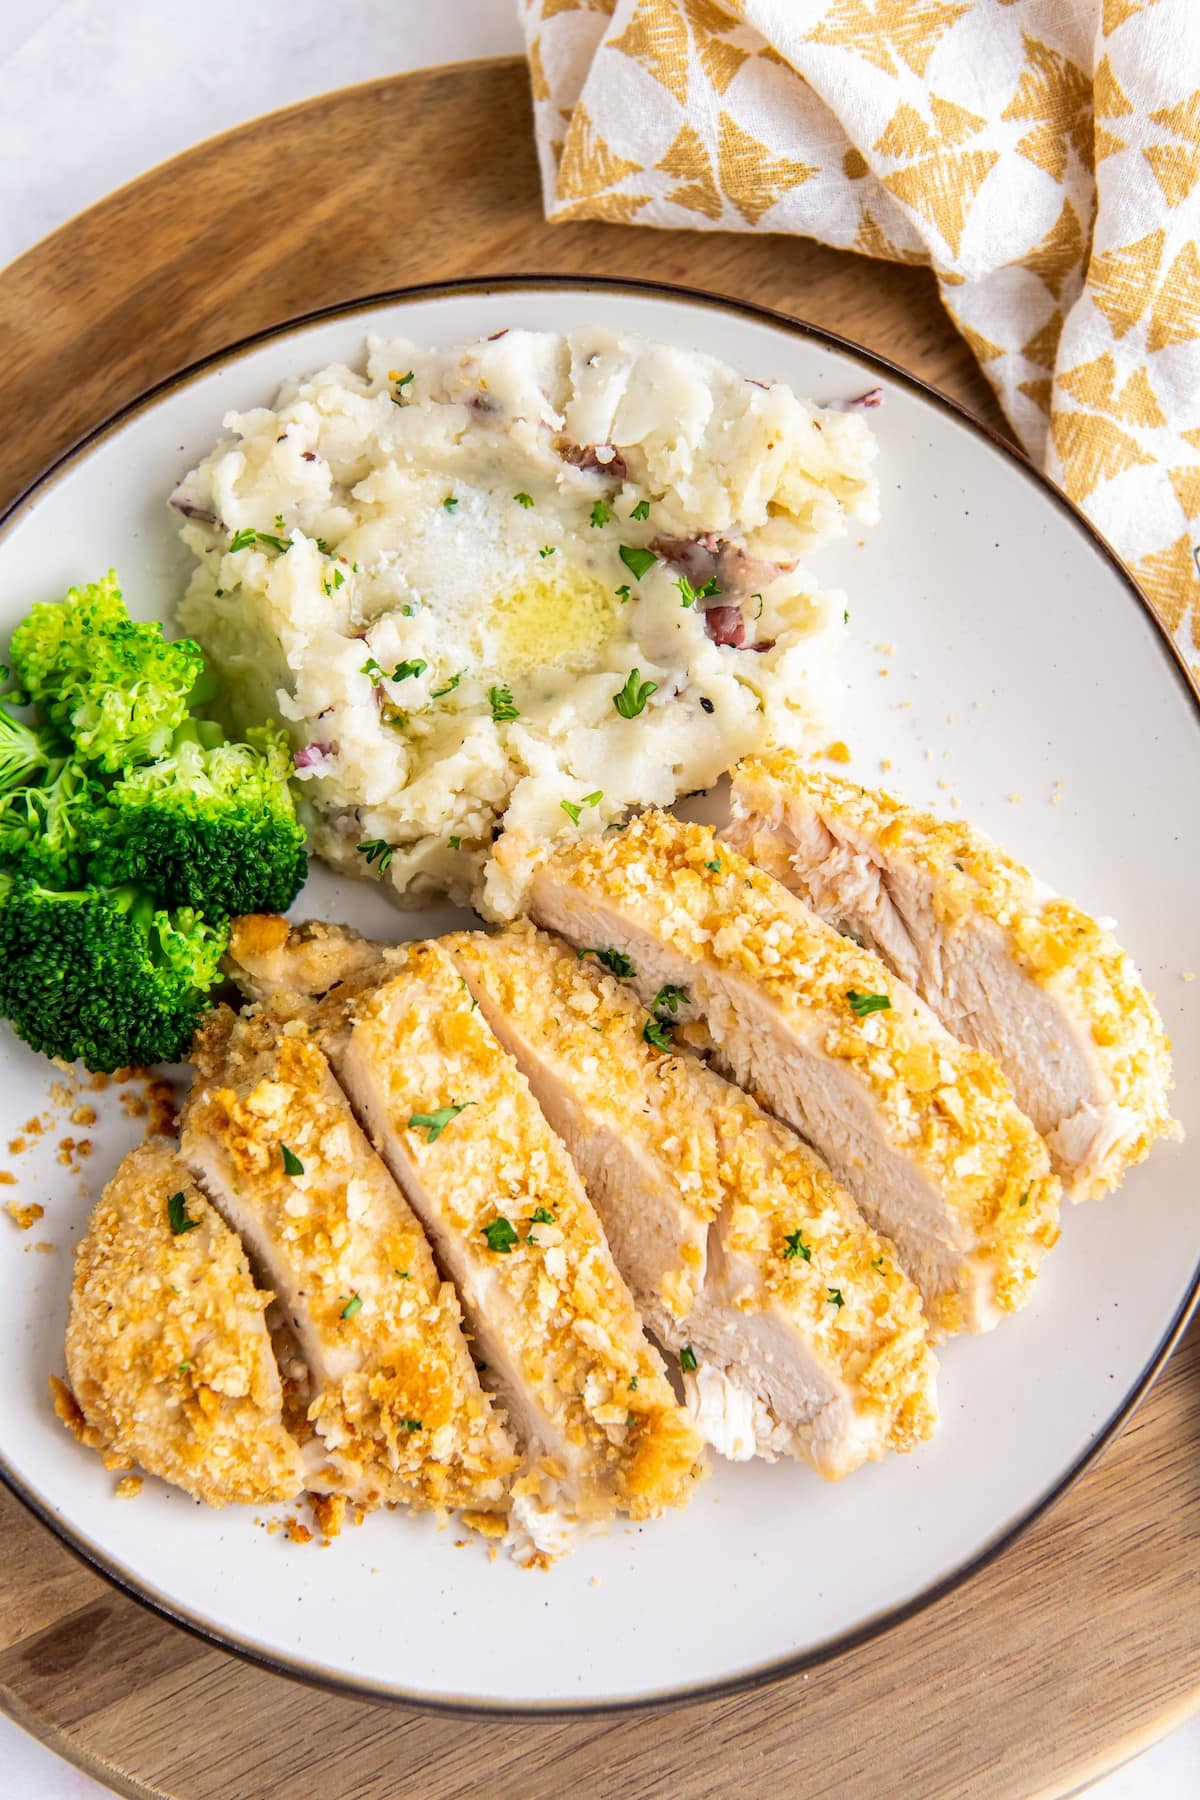 Sliced ritz chicken with veggies and mashed potatoes.